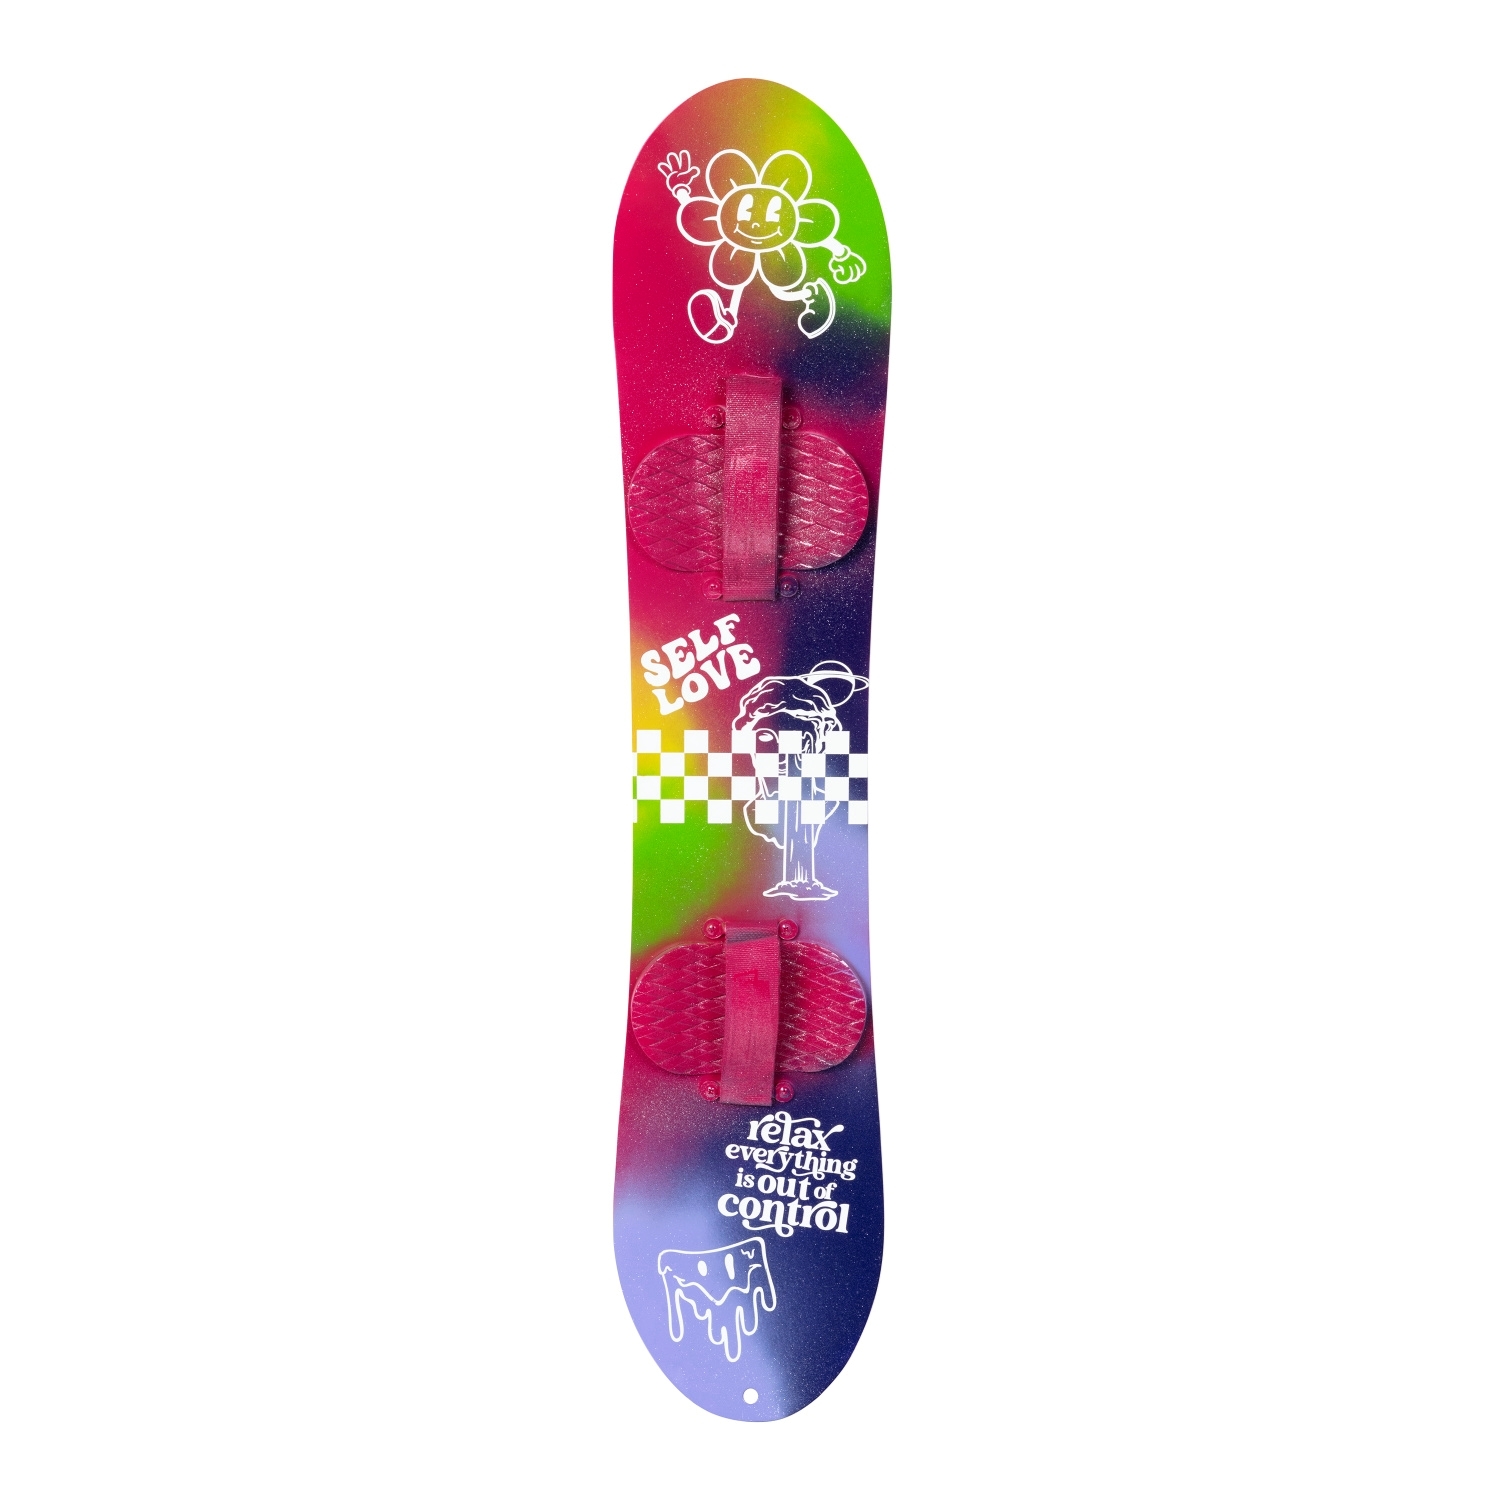 Colorful custom snowboard with COLORSHOT